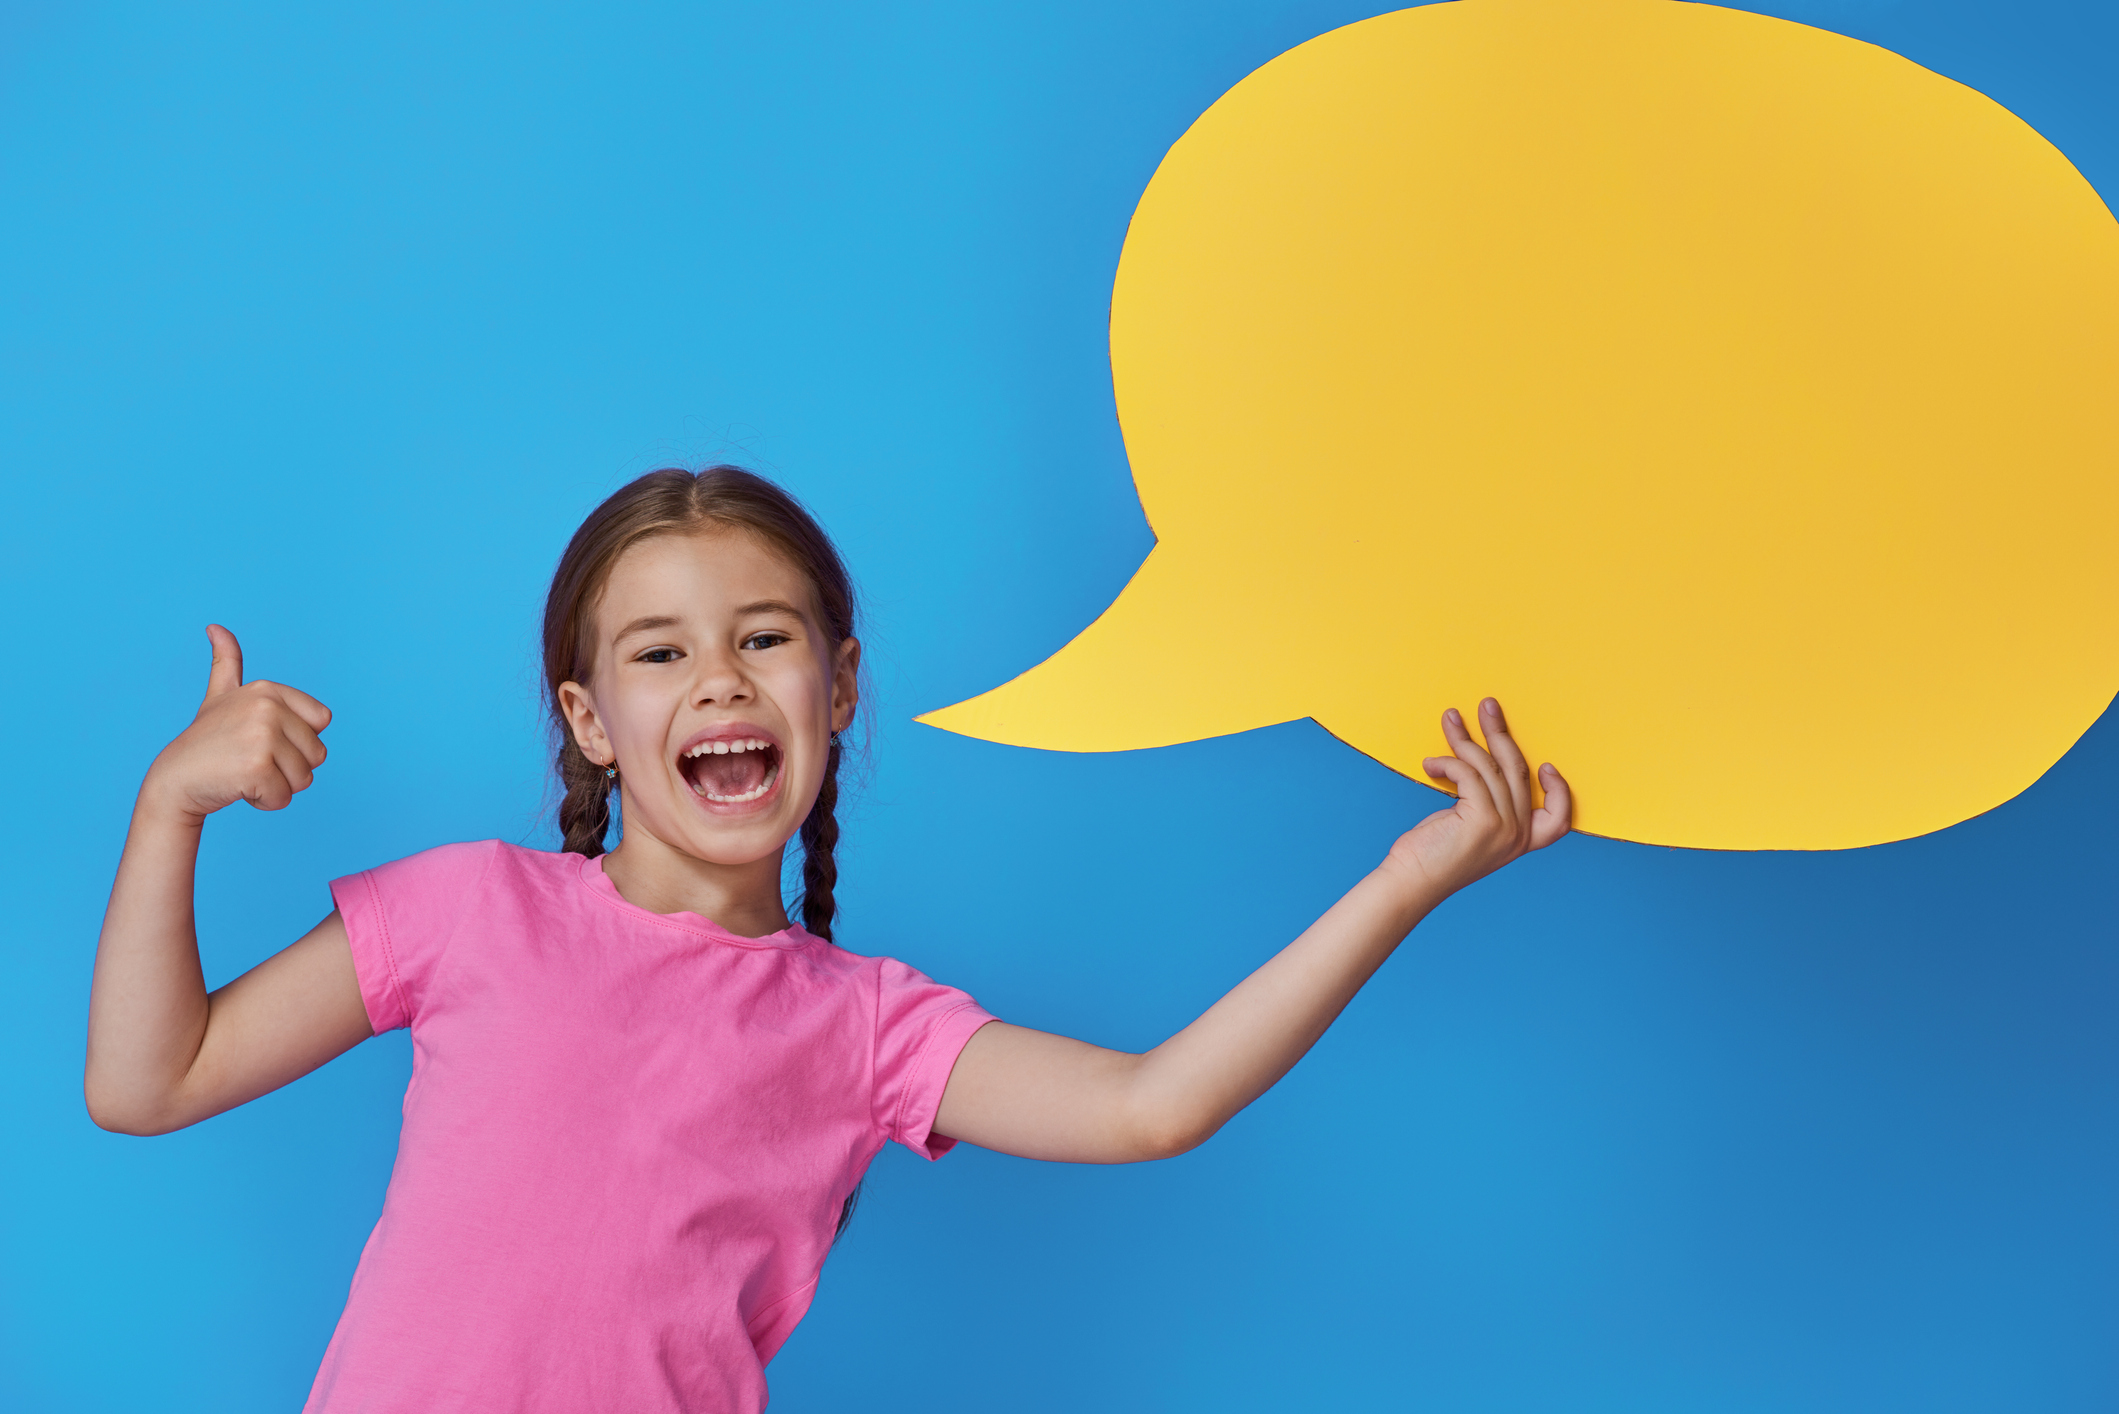 Cute little child girl with cartoon speech on colorful background. Yellow, pink and blue colors.